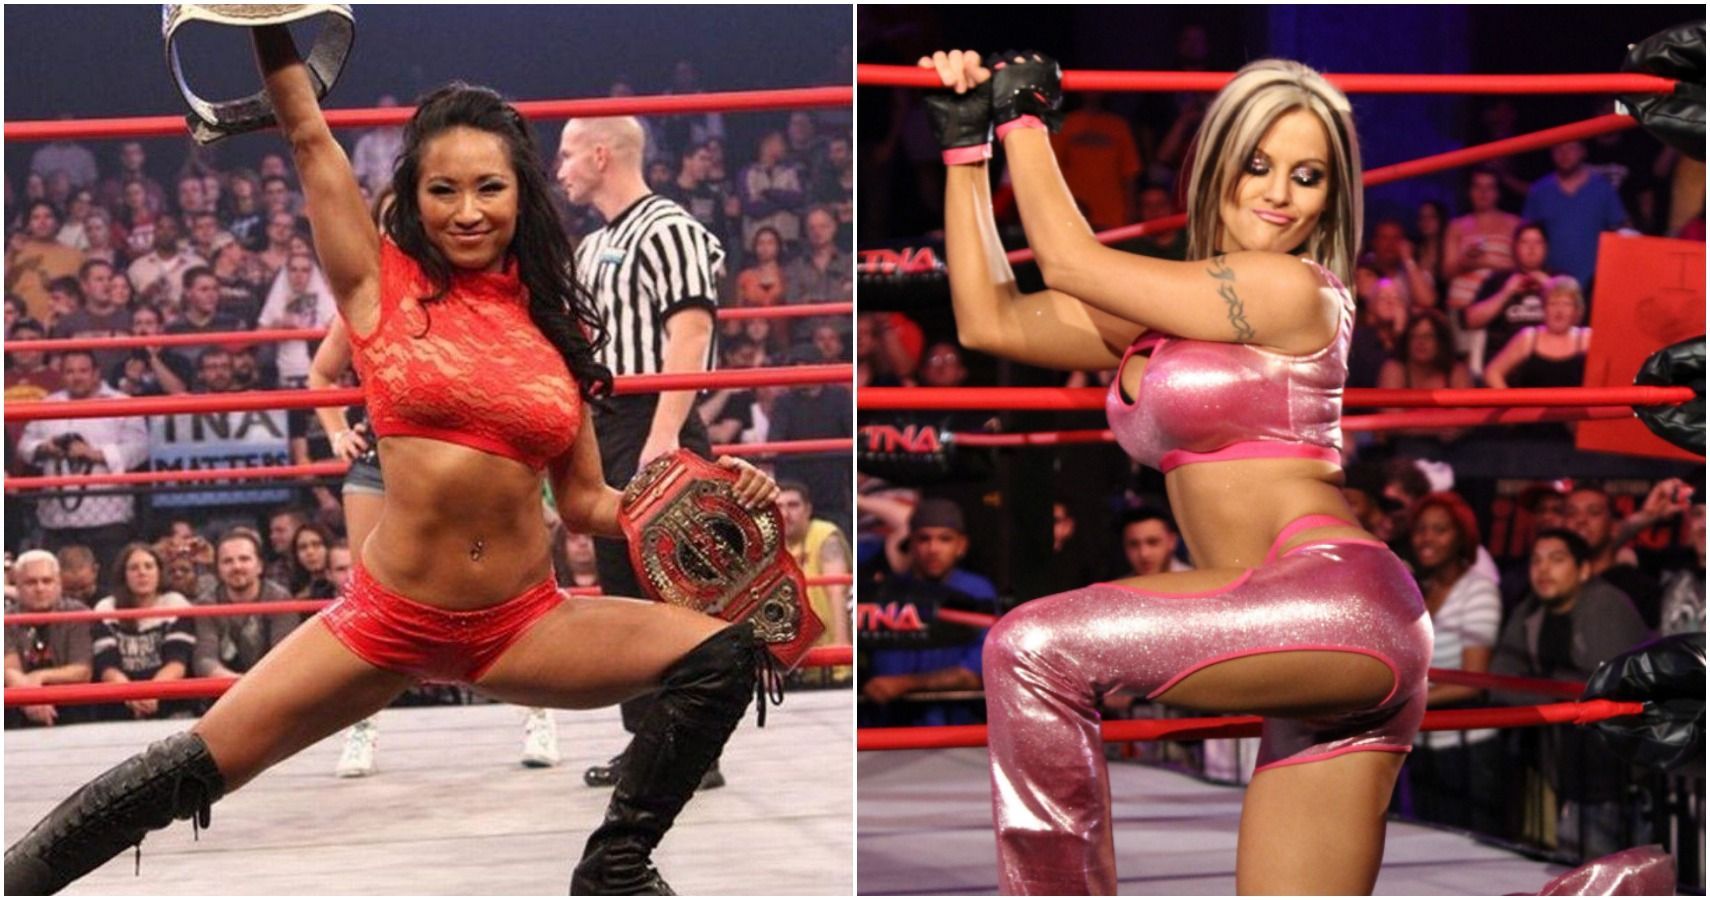 10-former-knockouts-champions-who-peaked-with-impact-wrestling